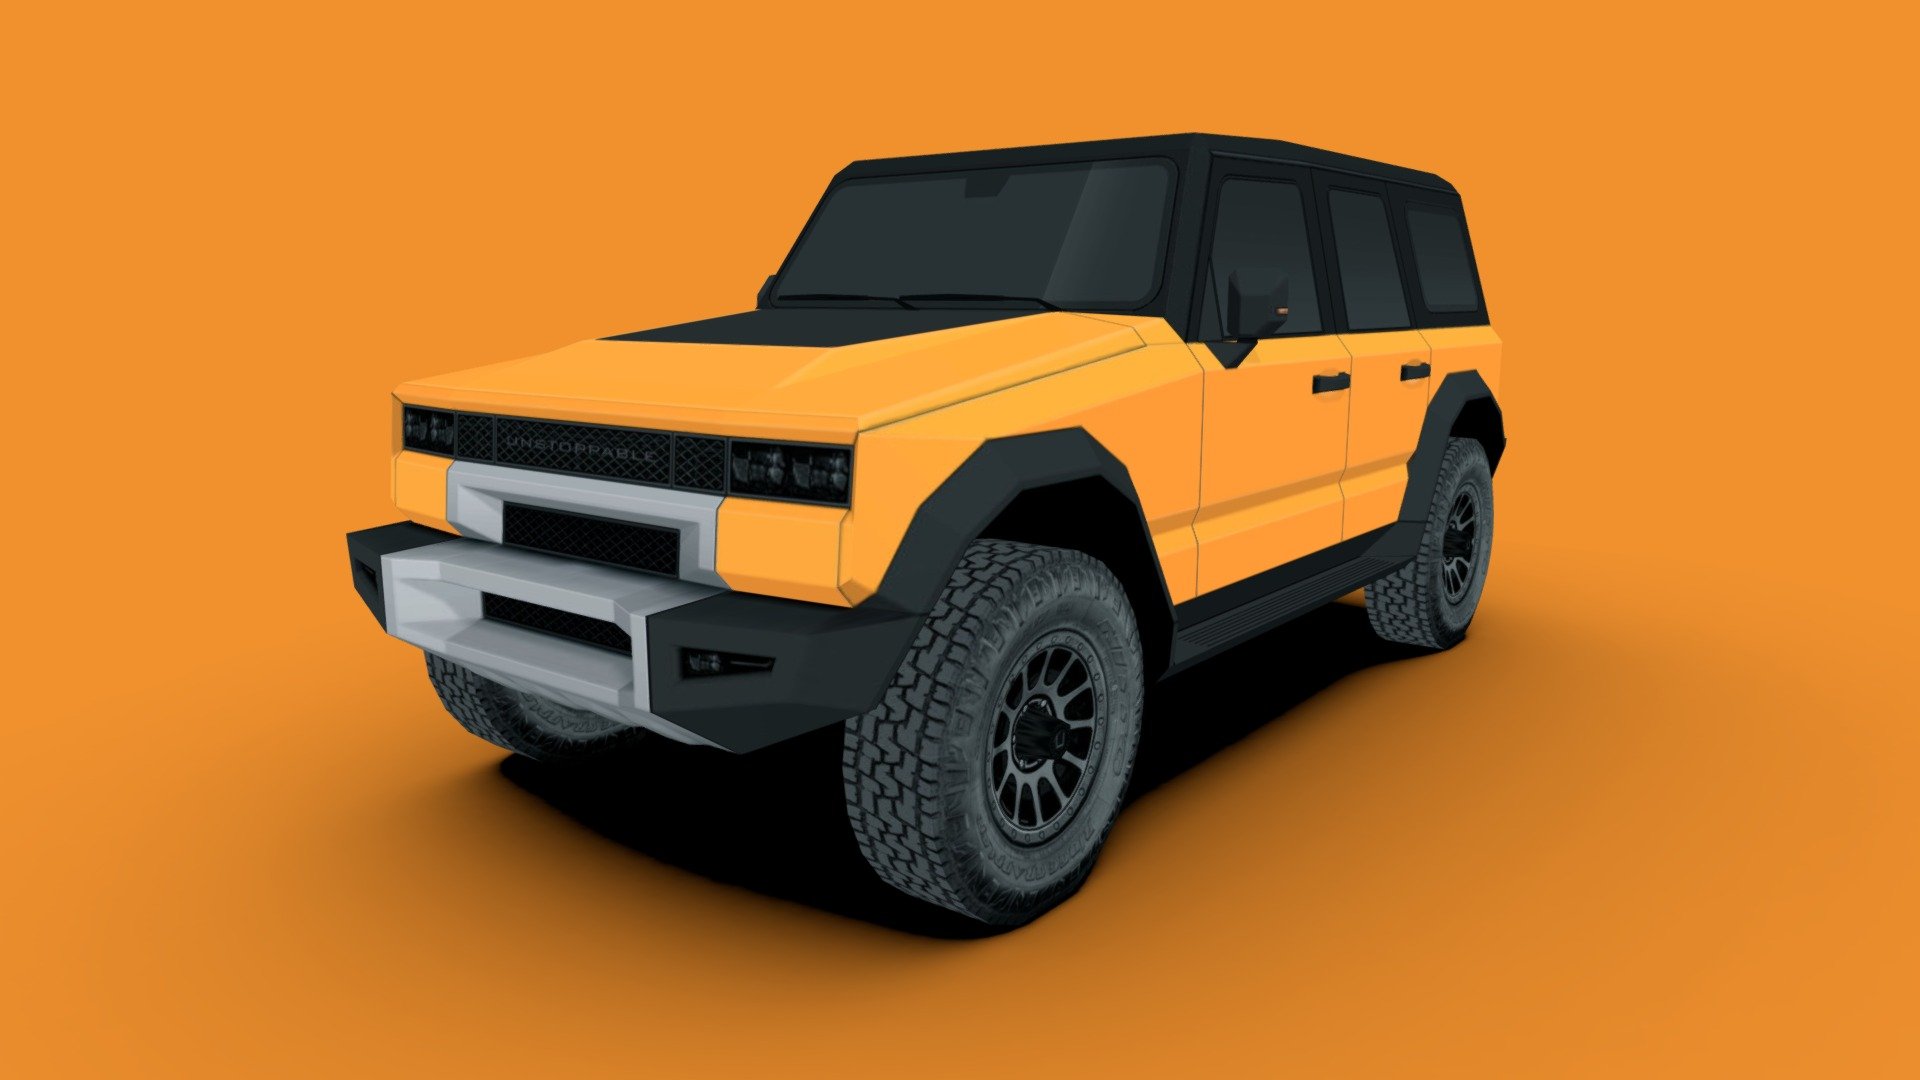 3d model of a generic mid-size off-road SUV

A free interpretation of what an off-road vehicle can be, with straight and timeless lines, without any design pretensions.

The model is very low-poly, full-scale, real photos texture (single 2048 x 2048 png).

Package includes 5 file formats and texture (3ds, fbx, dae, obj and skp)

Hope you enjoy it.

José Bronze - Generic off-road SUV - Buy Royalty Free 3D model by Jose Bronze (@pinceladas3d) 3d model